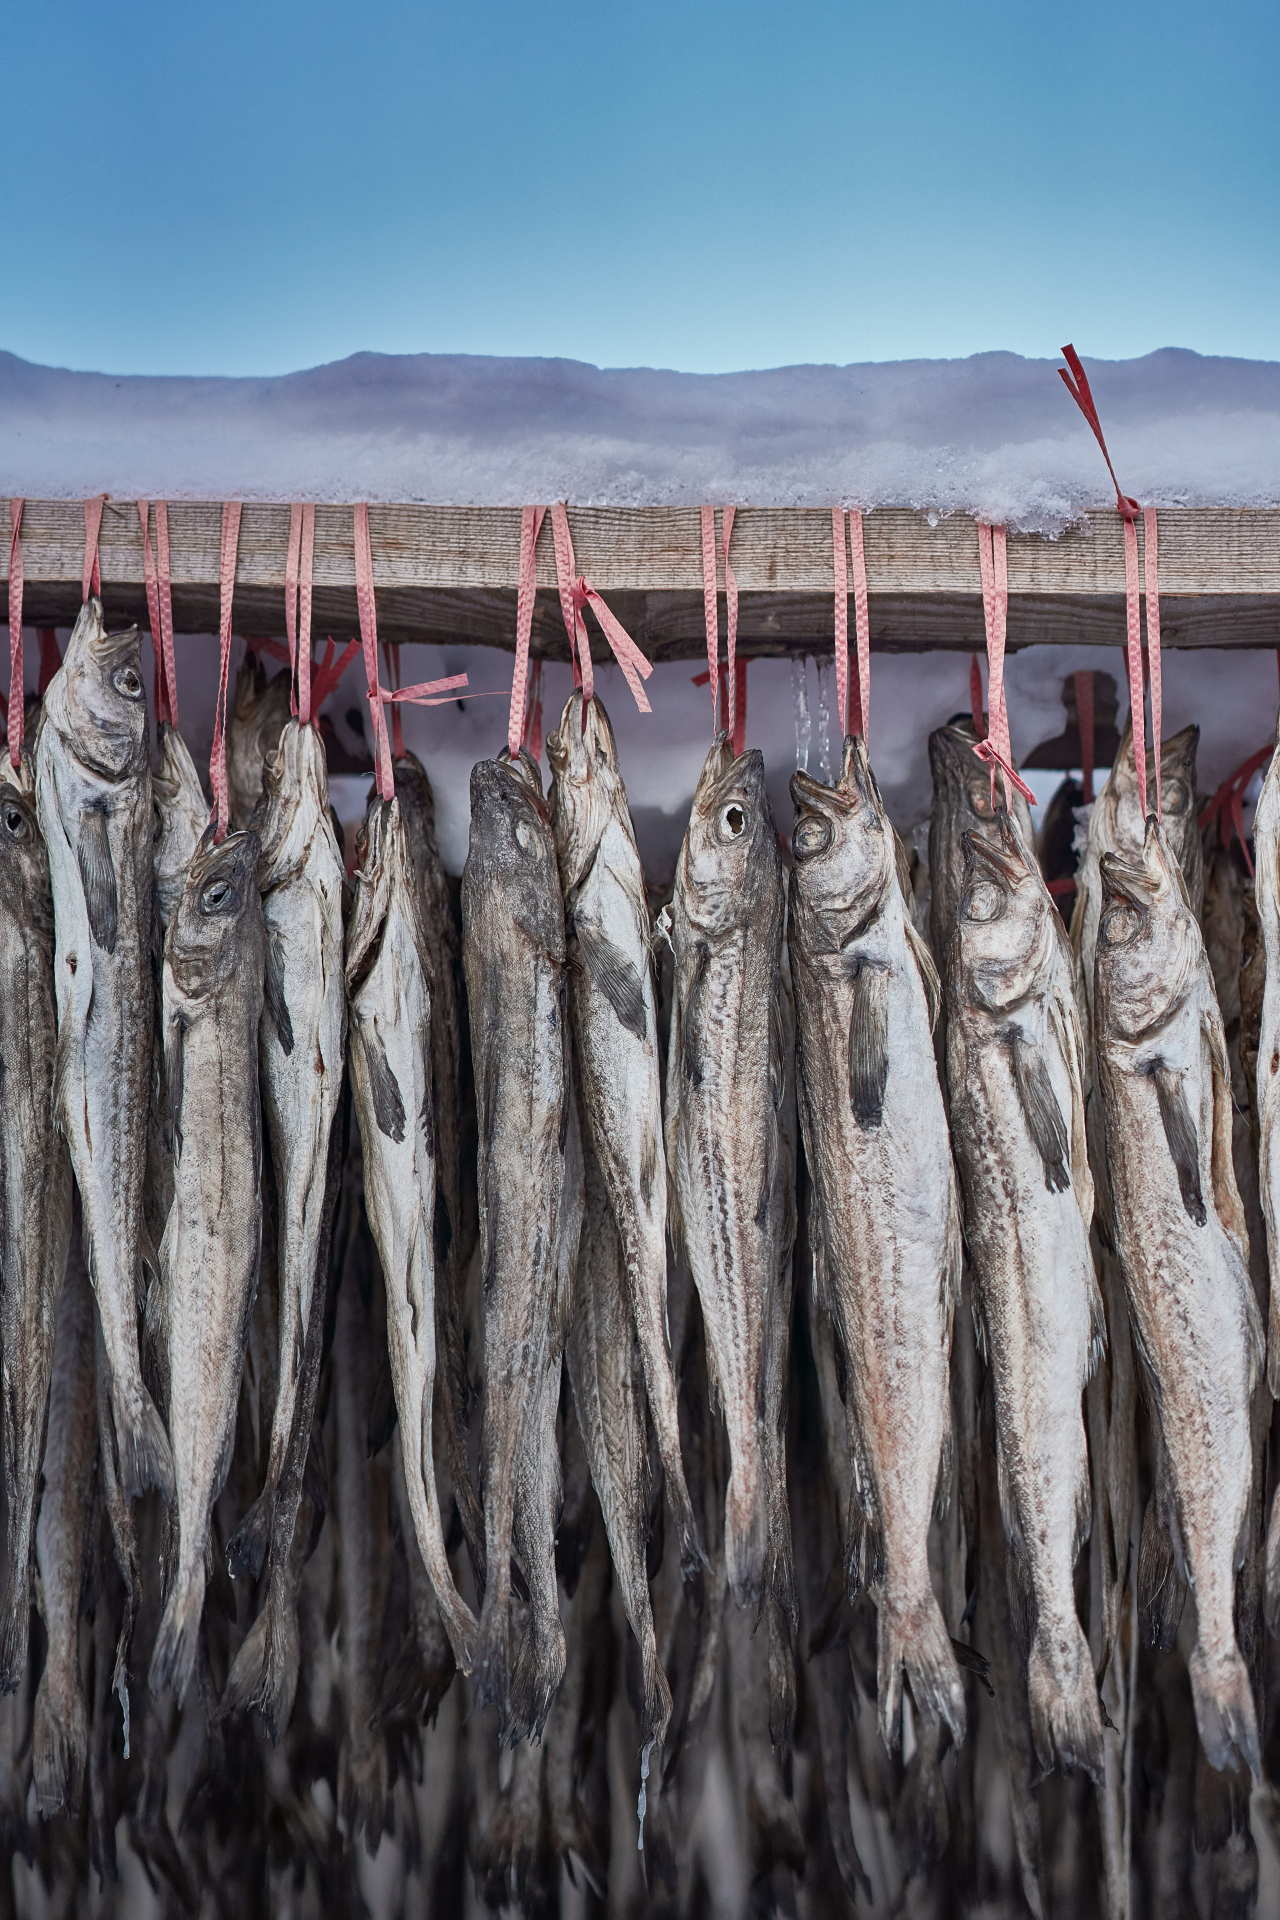 This stock image shows Alaska pollack, or myeongtae as it is called here, being dried and processed into hwangtae. (Gettye Images)